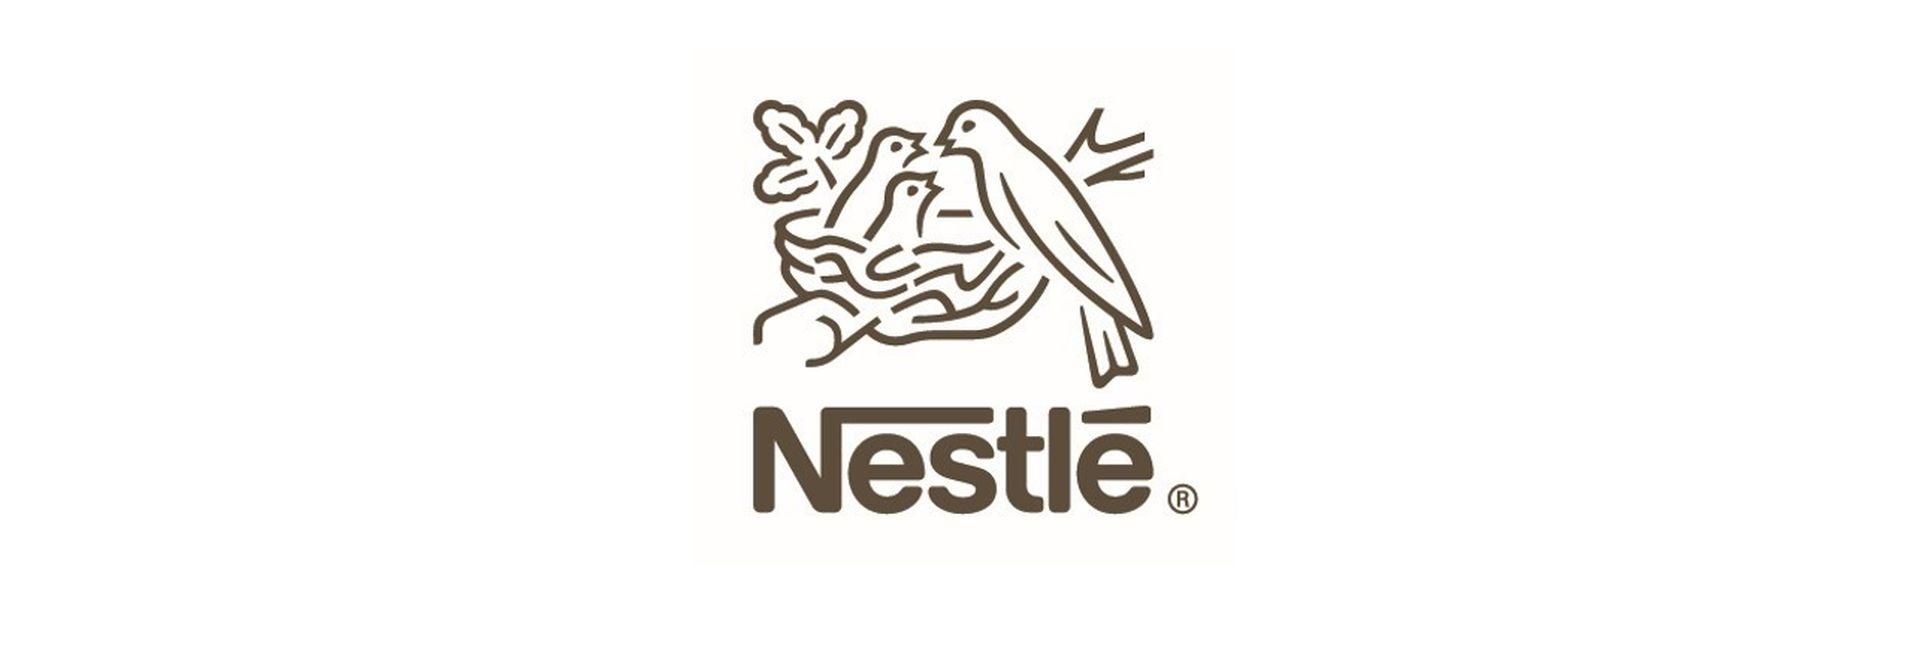 Another investment is launched at the Nestlé pet food factory in Bük